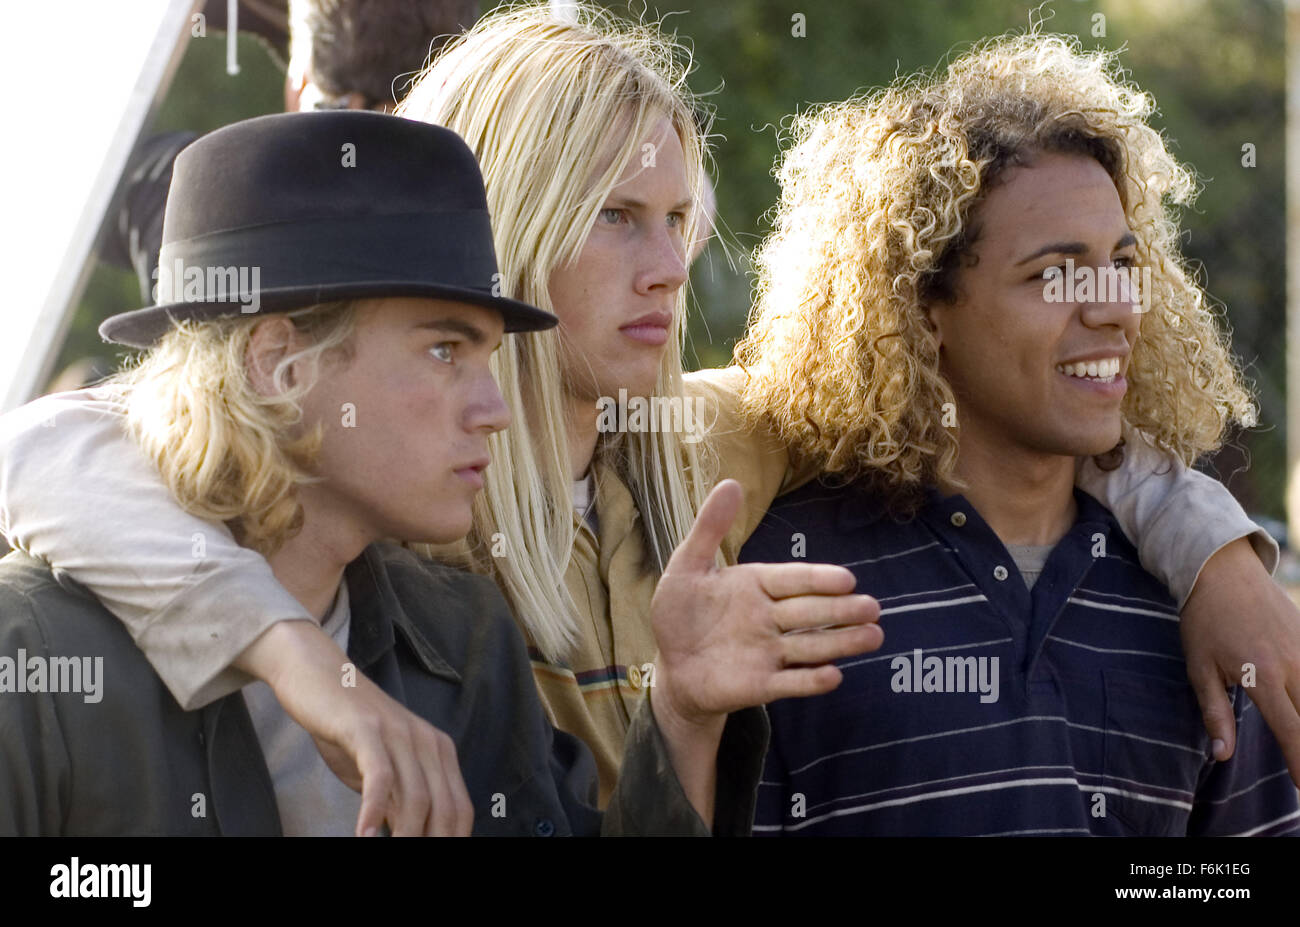 RELEASE DATE: June 03, 2005. MOVIE TITLE: Lords of Dogtown. STUDIO: Columbia Pictures. PLOT: A fictionalized take on the group of brilliant young skateboarders raised in the mean streets of Dogtown in Santa Monica, California. The Z-Boys, as they come to be known, perfect their craft in the empty swimming pools of unsuspecting suburban homeowners, pioneering a thrilling new sport and eventually moving into legend. PICTURED: VICTOR RASUK as Tony Alva, JOHN ROBINSON as Stacy Peralta and EMILE HIRSCH as Jay Adams. Stock Photo